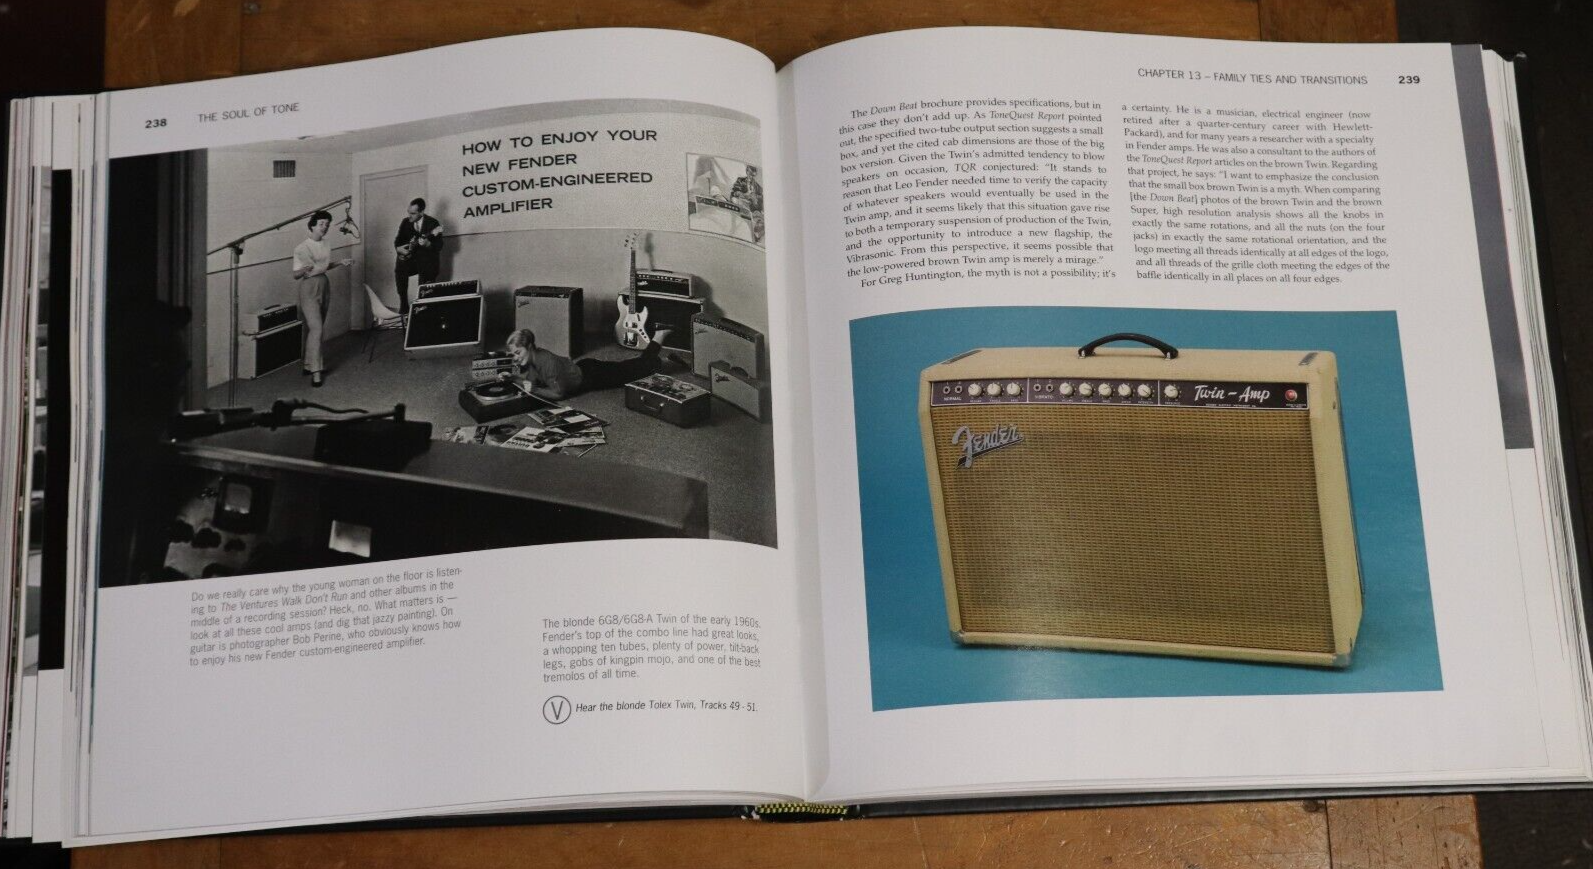 The Soul of Tone: Celebrating 60 Years of Fender Amps  - Fender Guitar Book